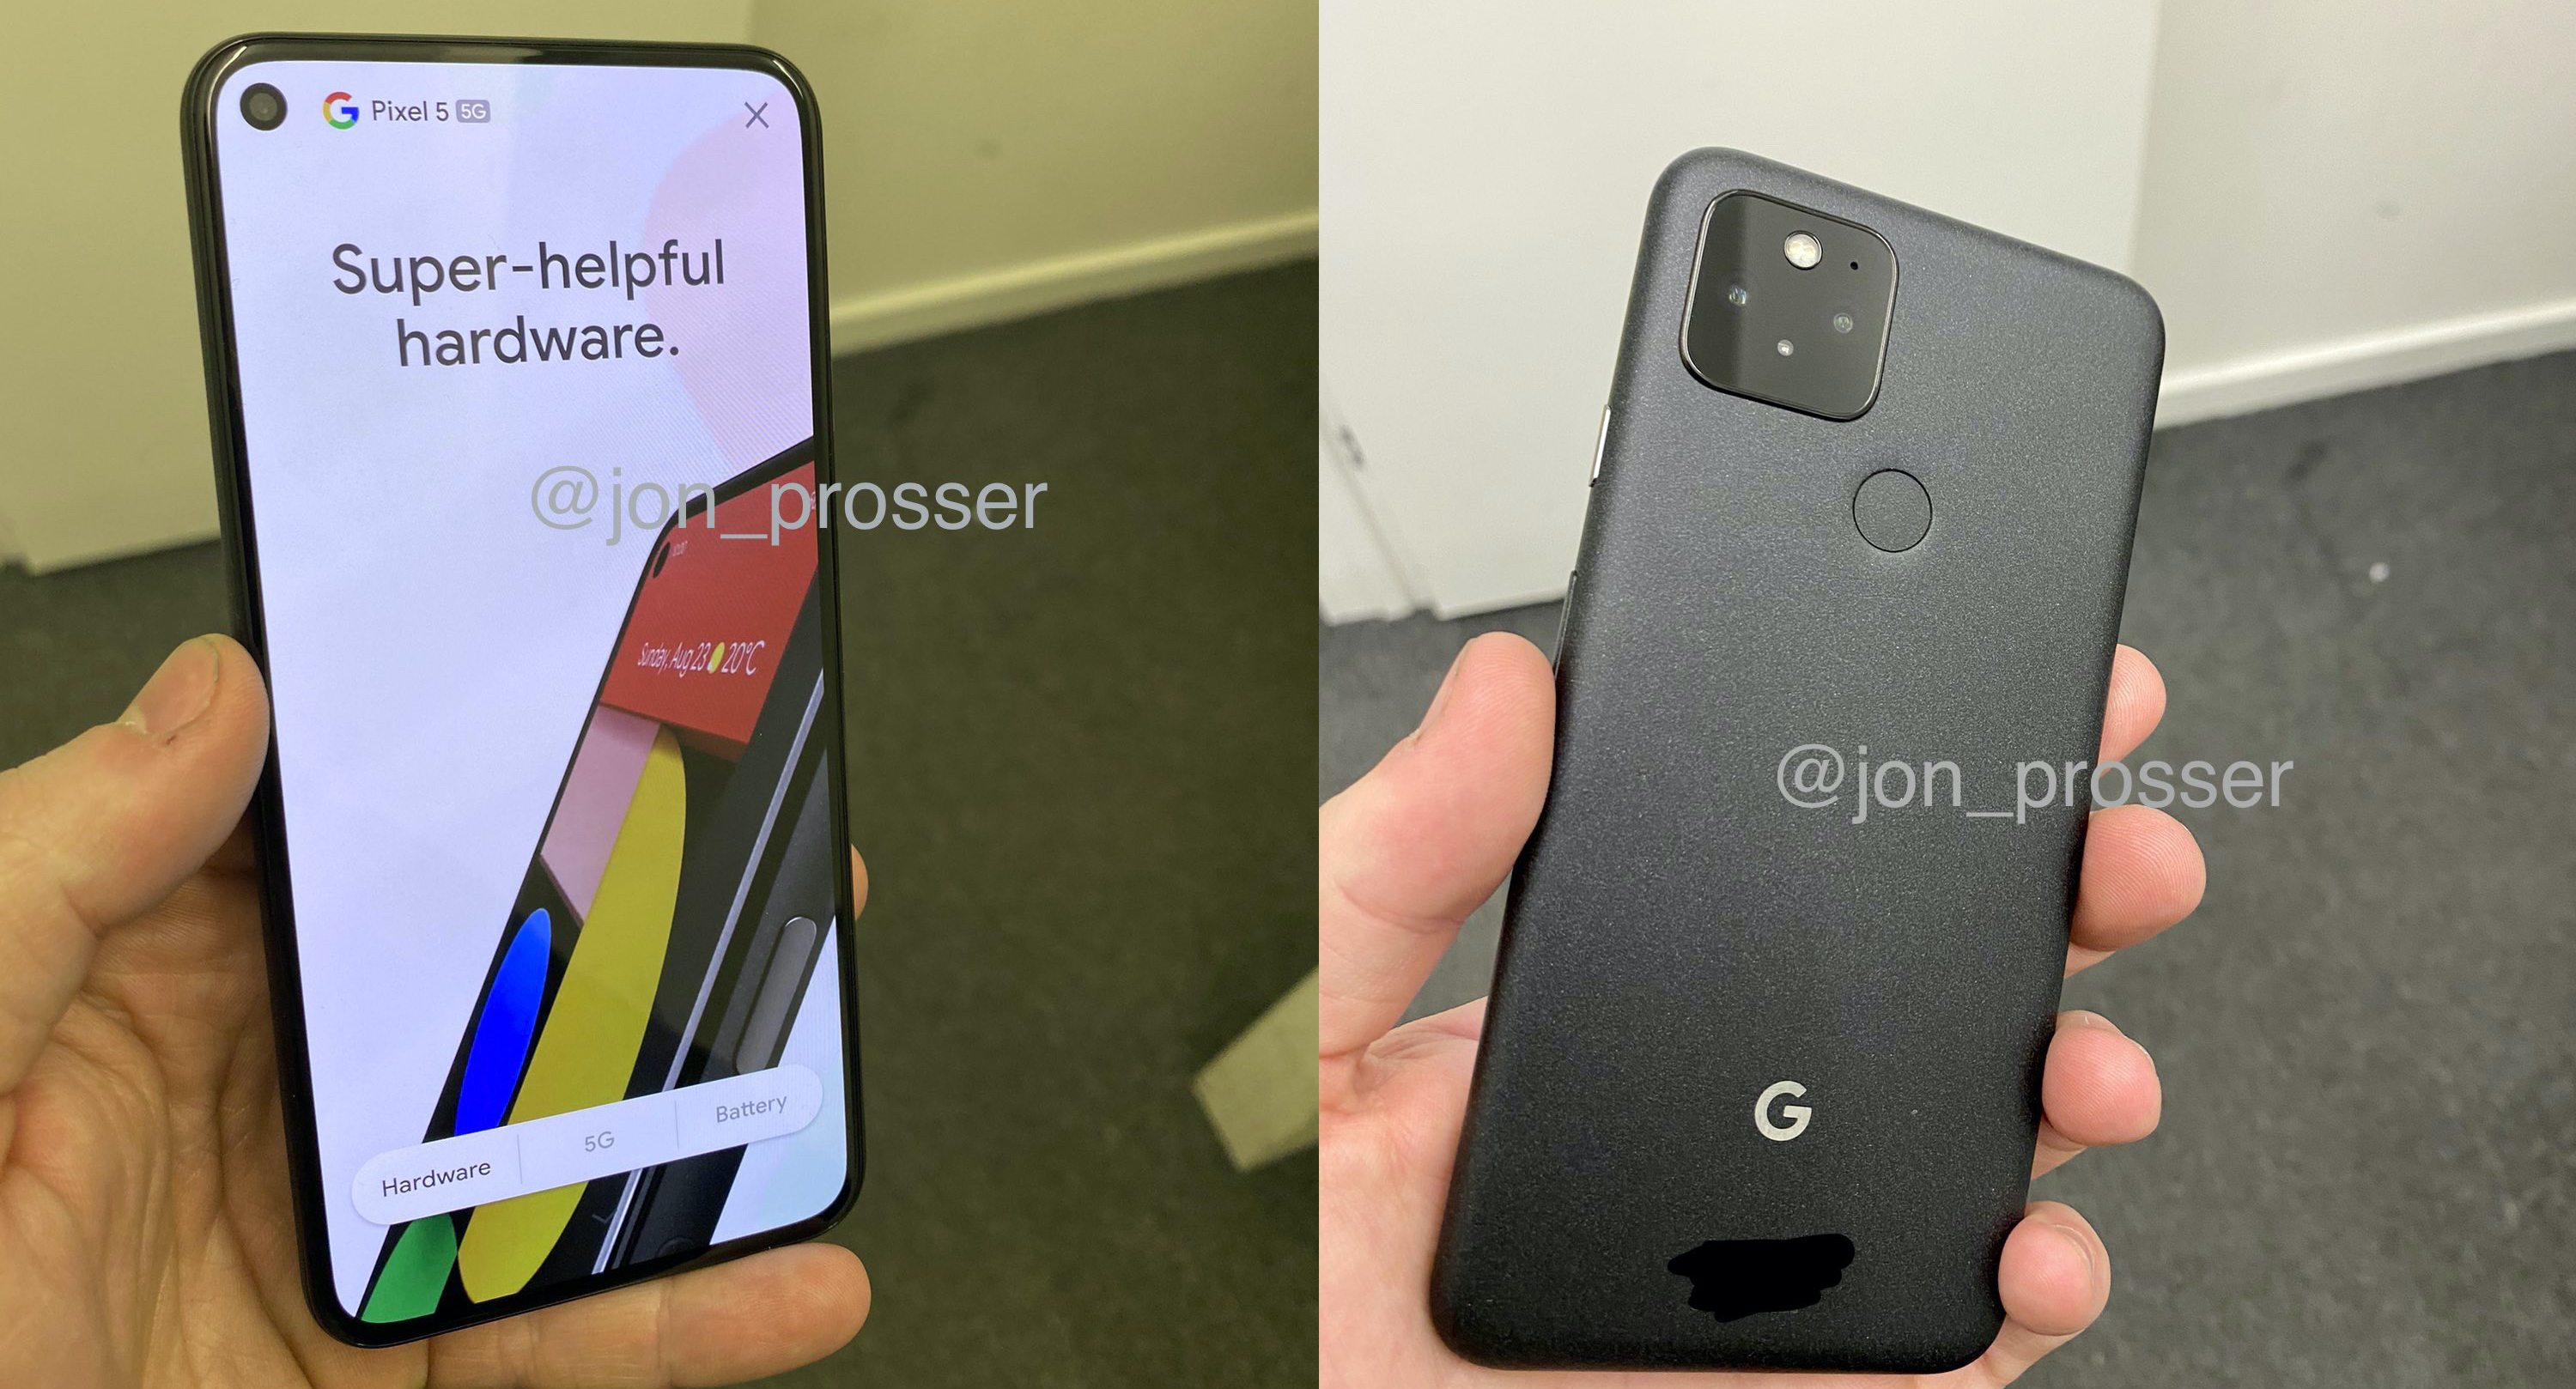 Pixel 5 and Pixel 4a 5G prices and colors leaked by multiple retailers